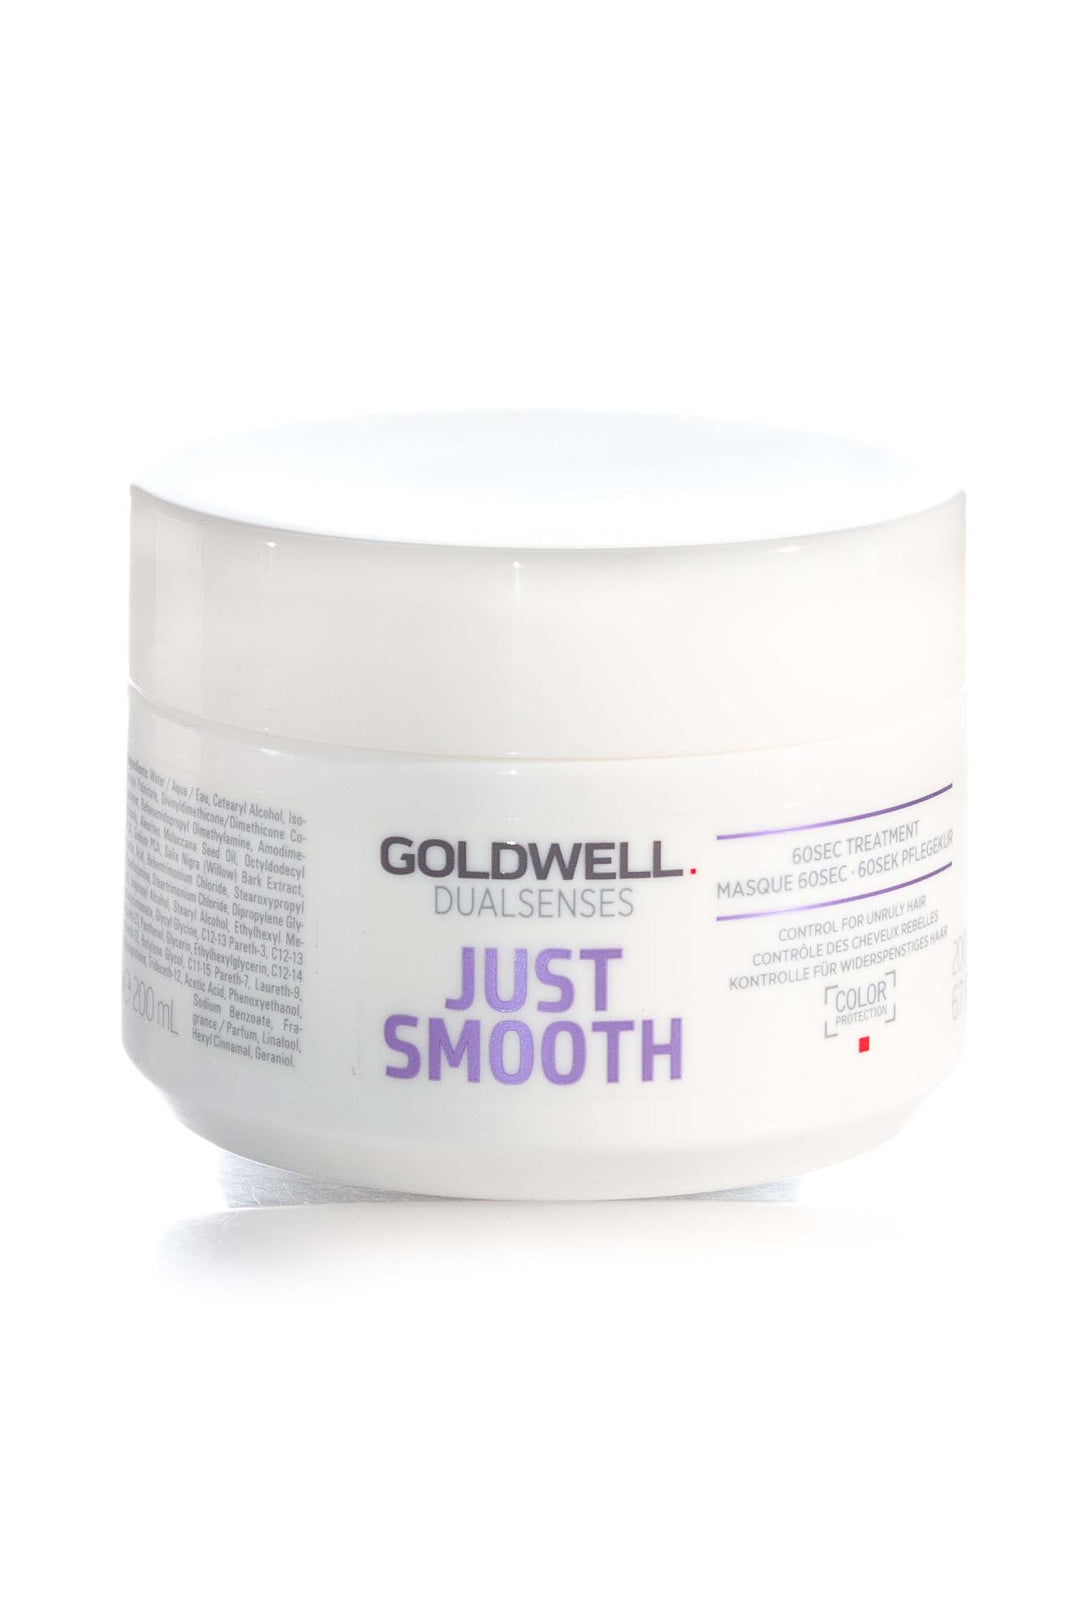 GOLDWELL Dual Senses Just Smooth 60sec Treatment | Various Sizes